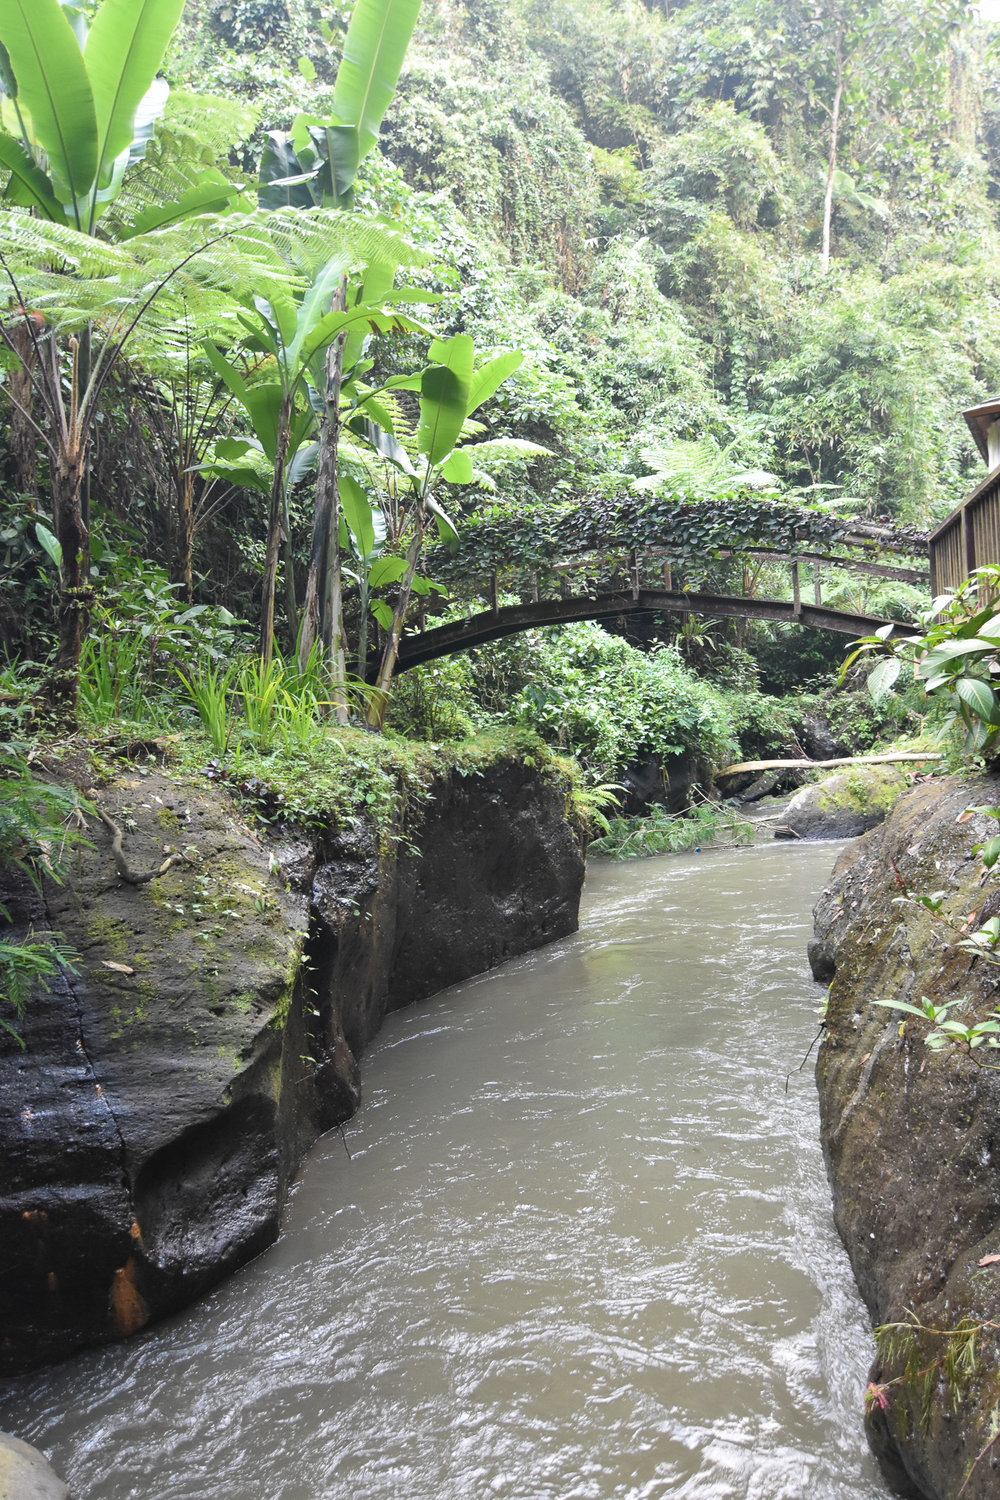  The Ayung river flowing through the jungle. 